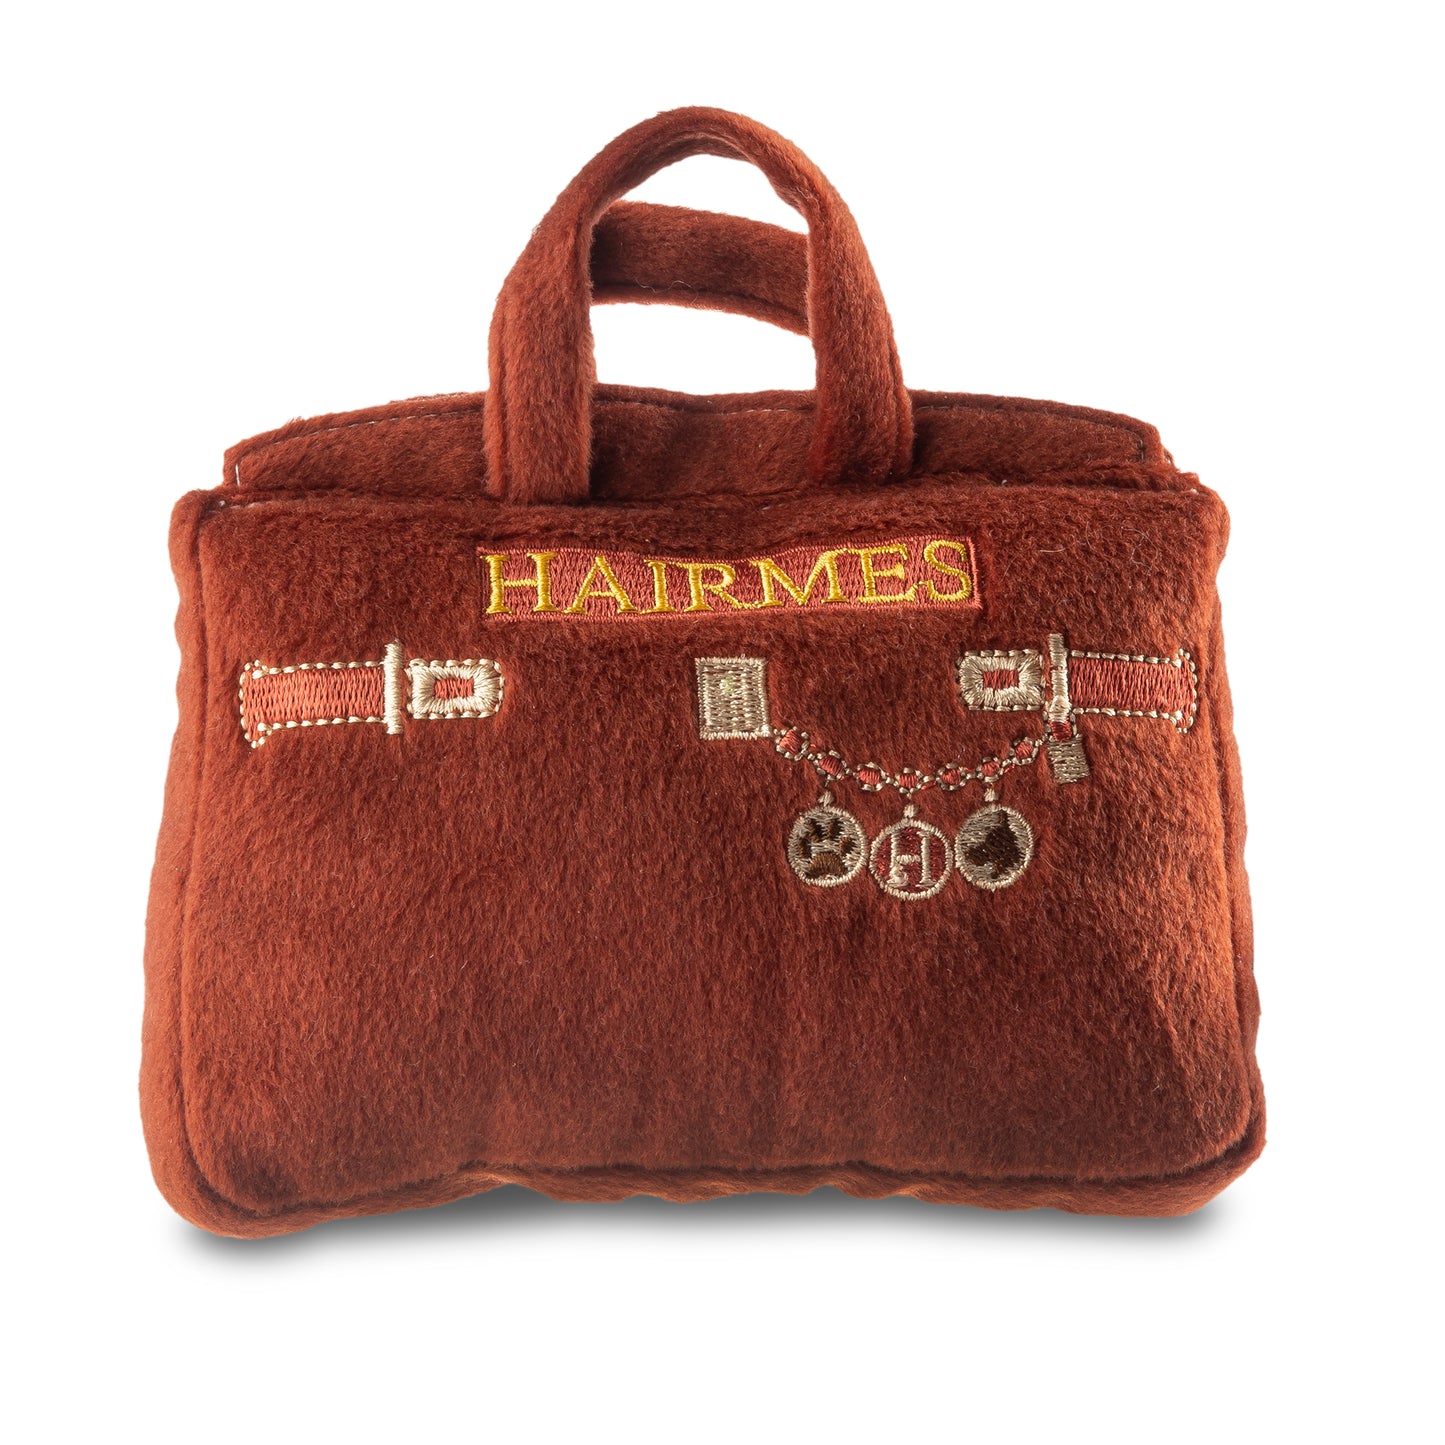 Hairmes Purse Toy